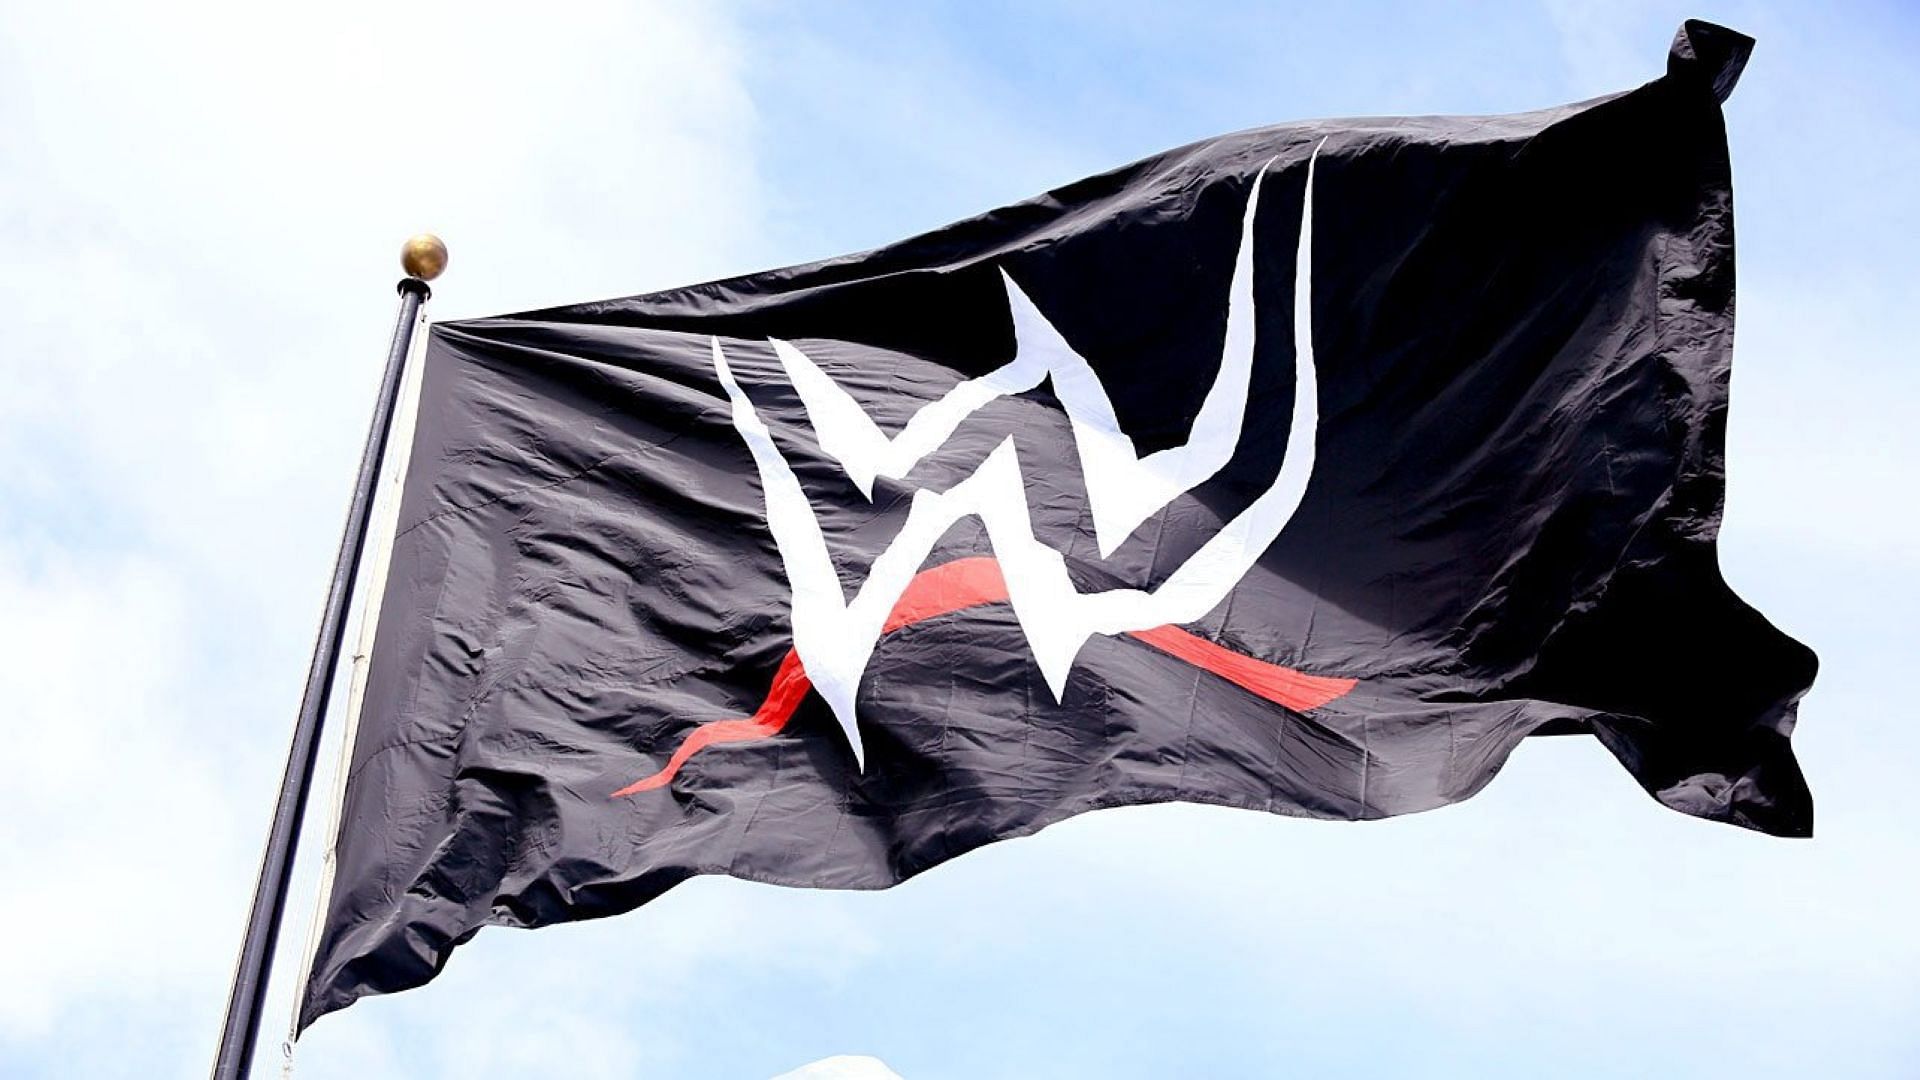 The official WWE logo flag flying high at company HQ in Stamford, CT